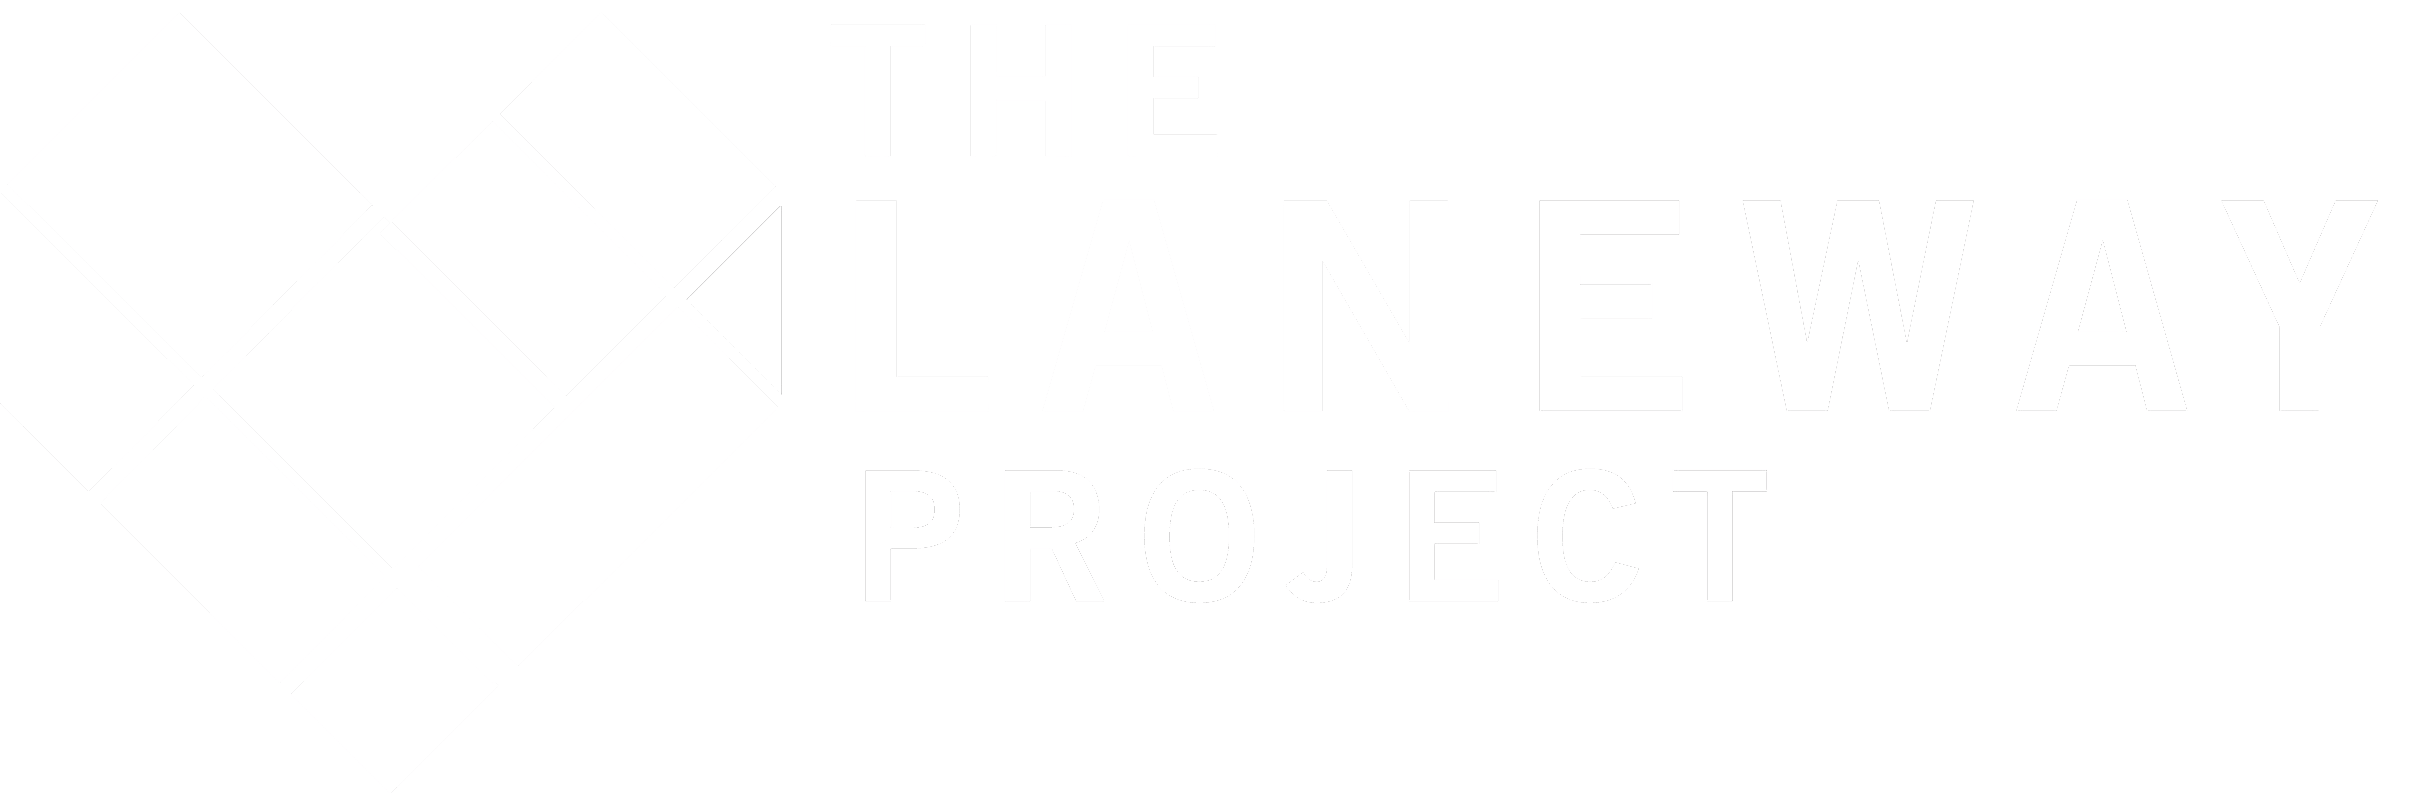 The Laneway Project